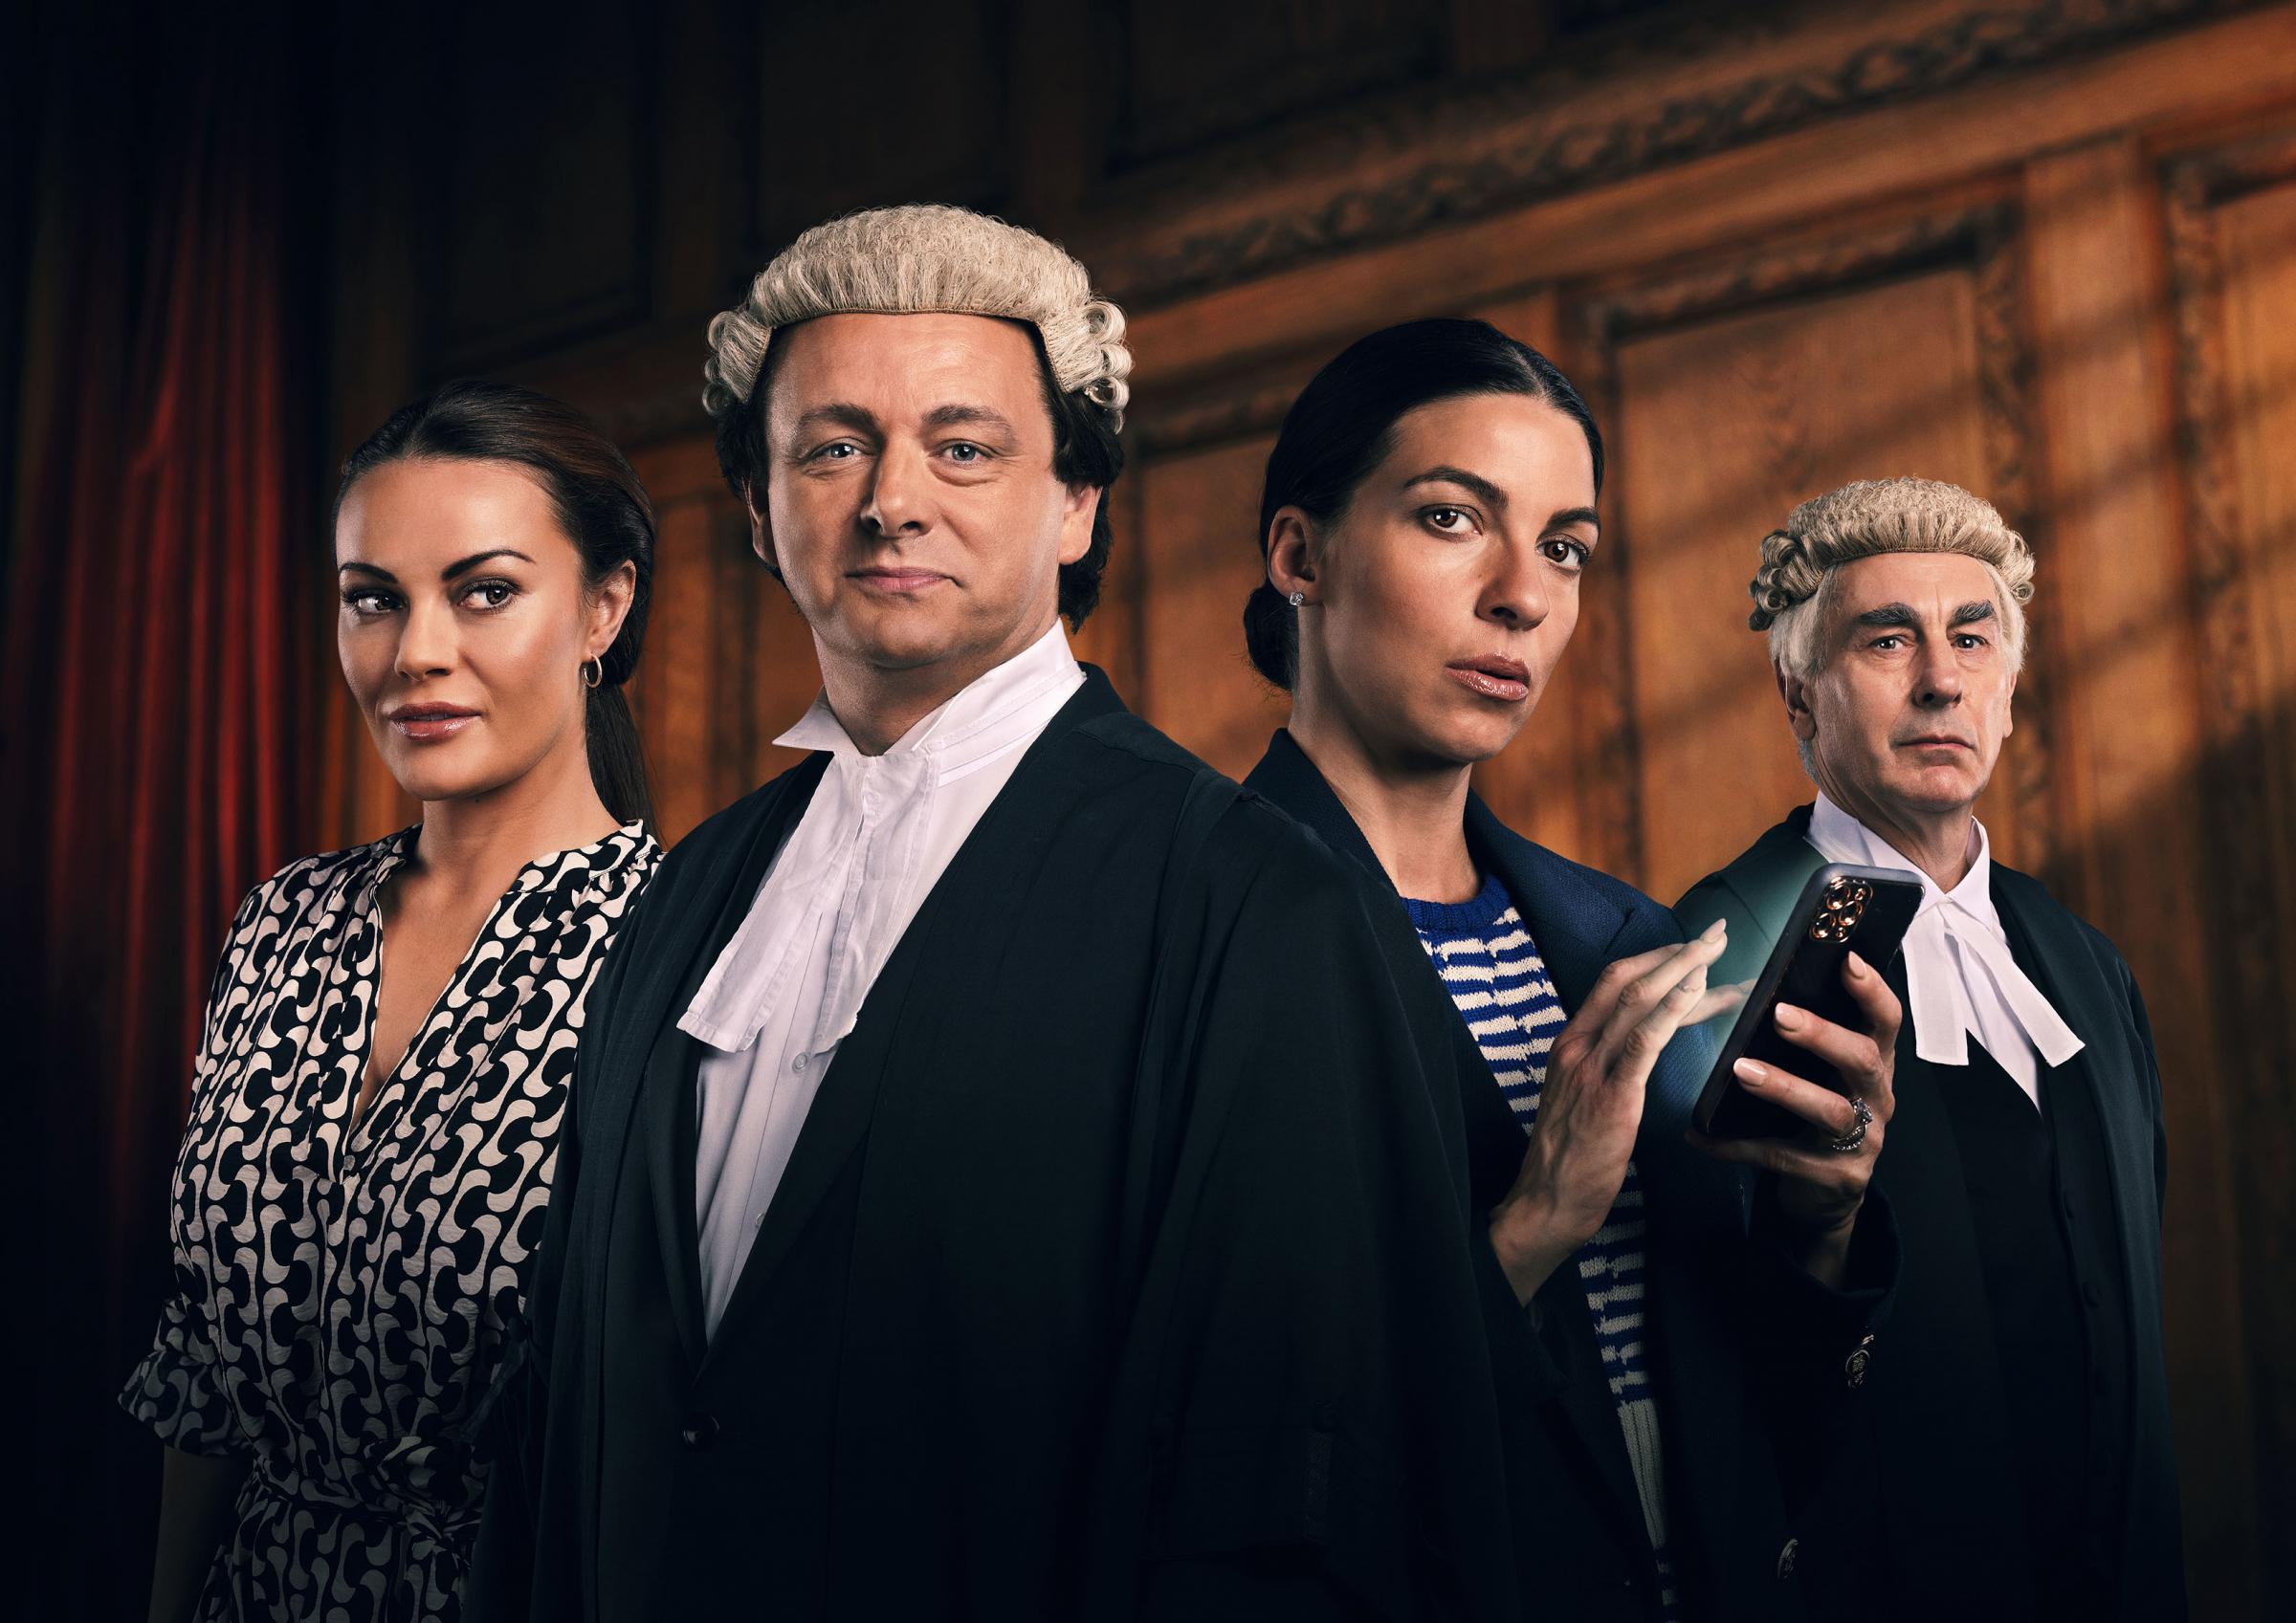 Chanel Cresswell as Coleen Rooney, Michael Sheen as David Sherborne QC, Natalia Tena as Rebekah Vardy and Simon Coury as Hugh Tomlinson QC in the upcoming series Vardy v Rooney: A Courtroom Drama, a dramatisation of the 2022 High Court battle that